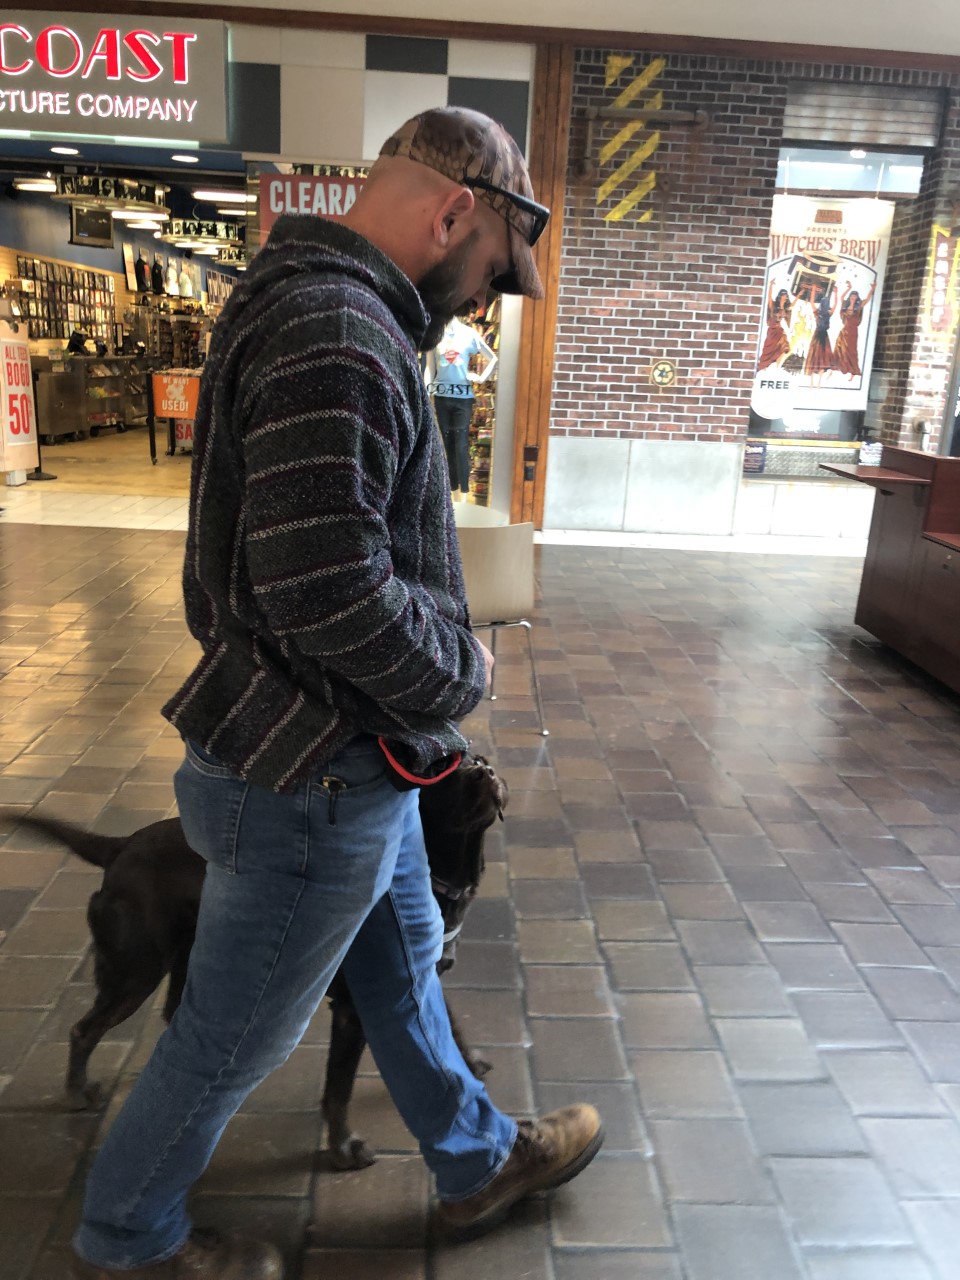 Therapy Dog Walking With Owner